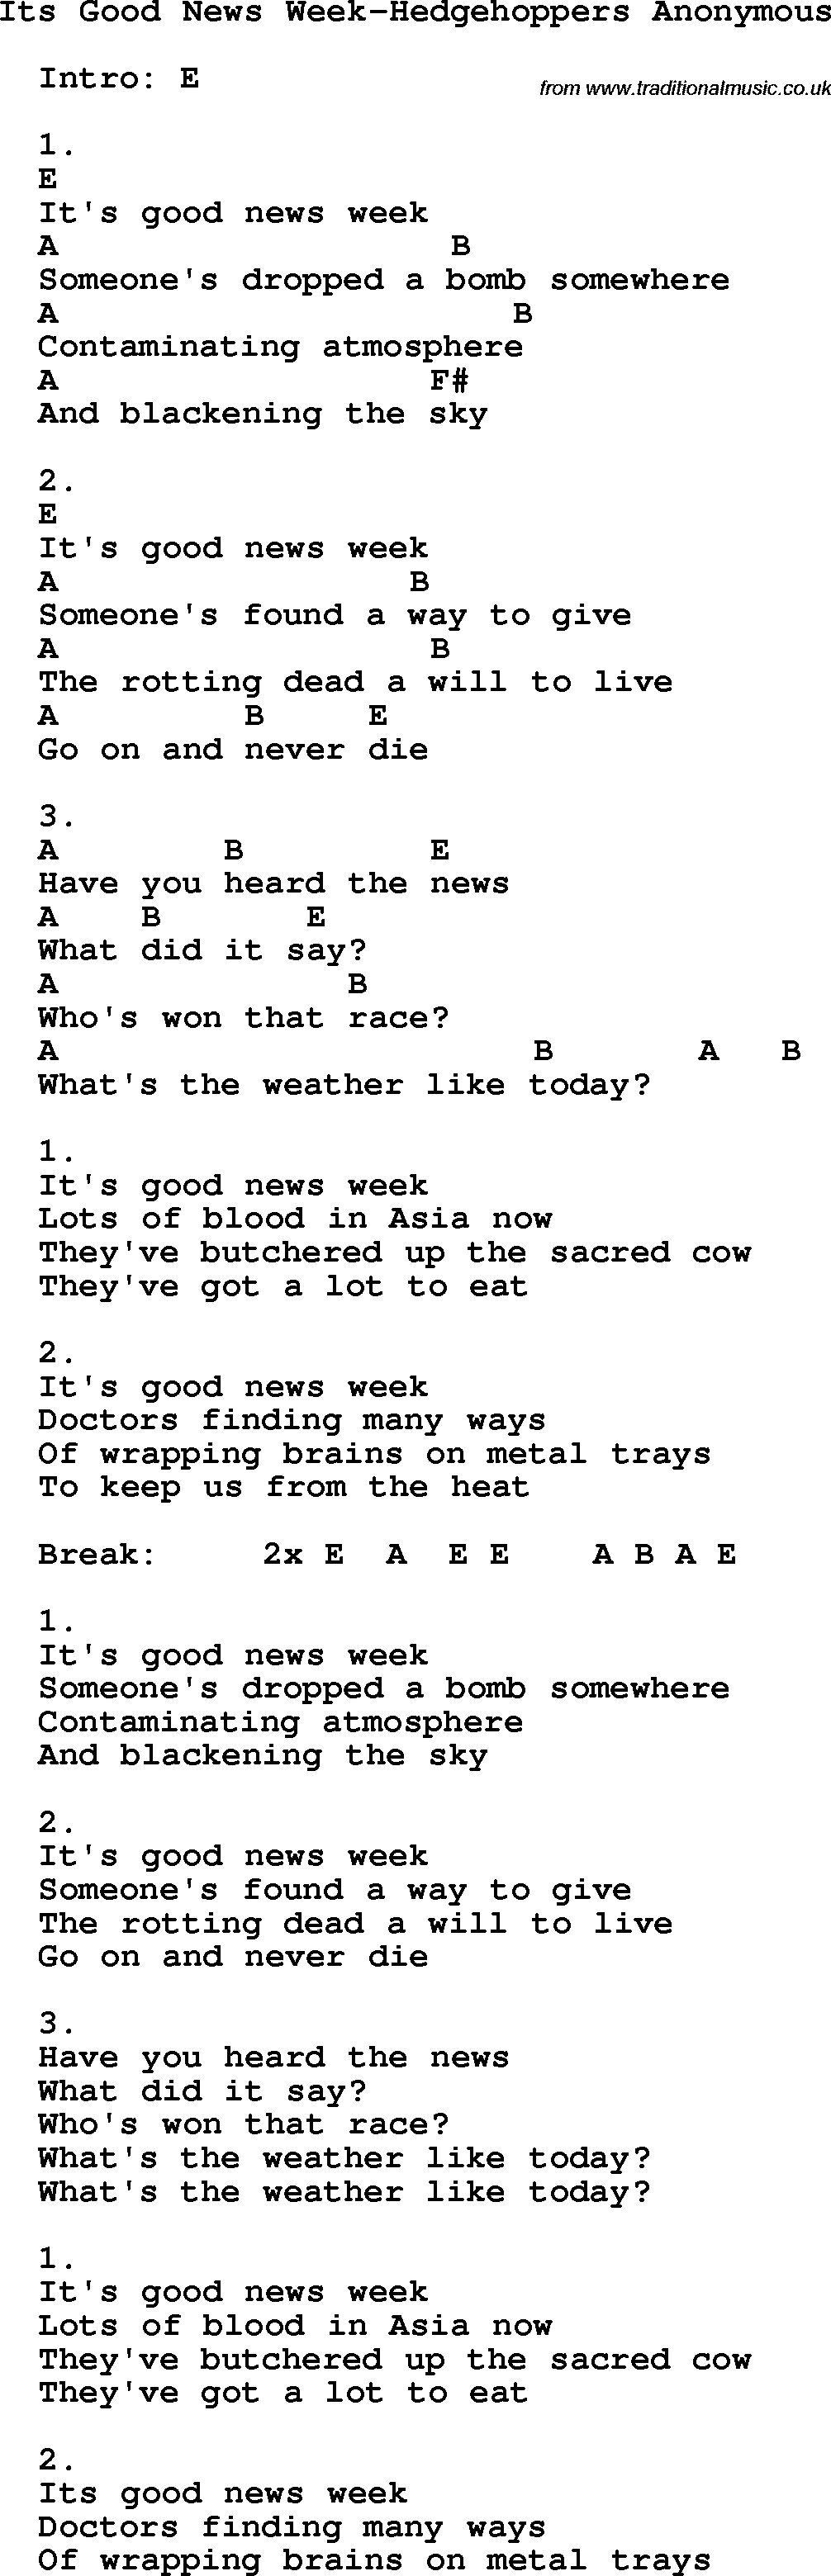 Protest Song Its Good News Week-Hedgehoppers Anonymous lyrics and chords